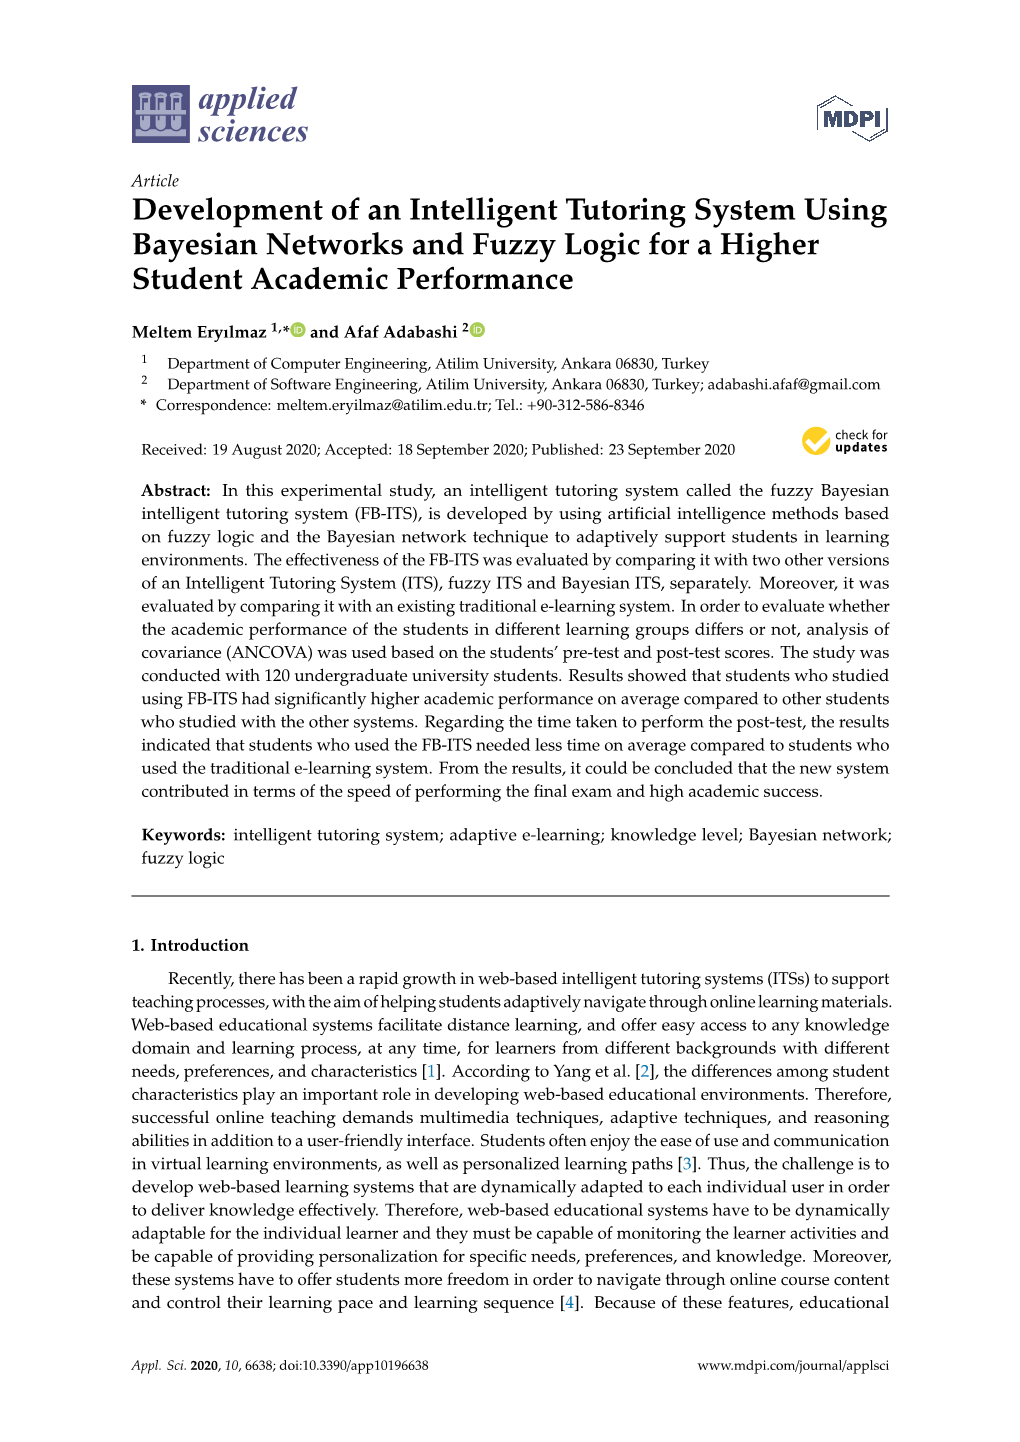 Development of an Intelligent Tutoring System Using Bayesian Networks and Fuzzy Logic for a Higher Student Academic Performance